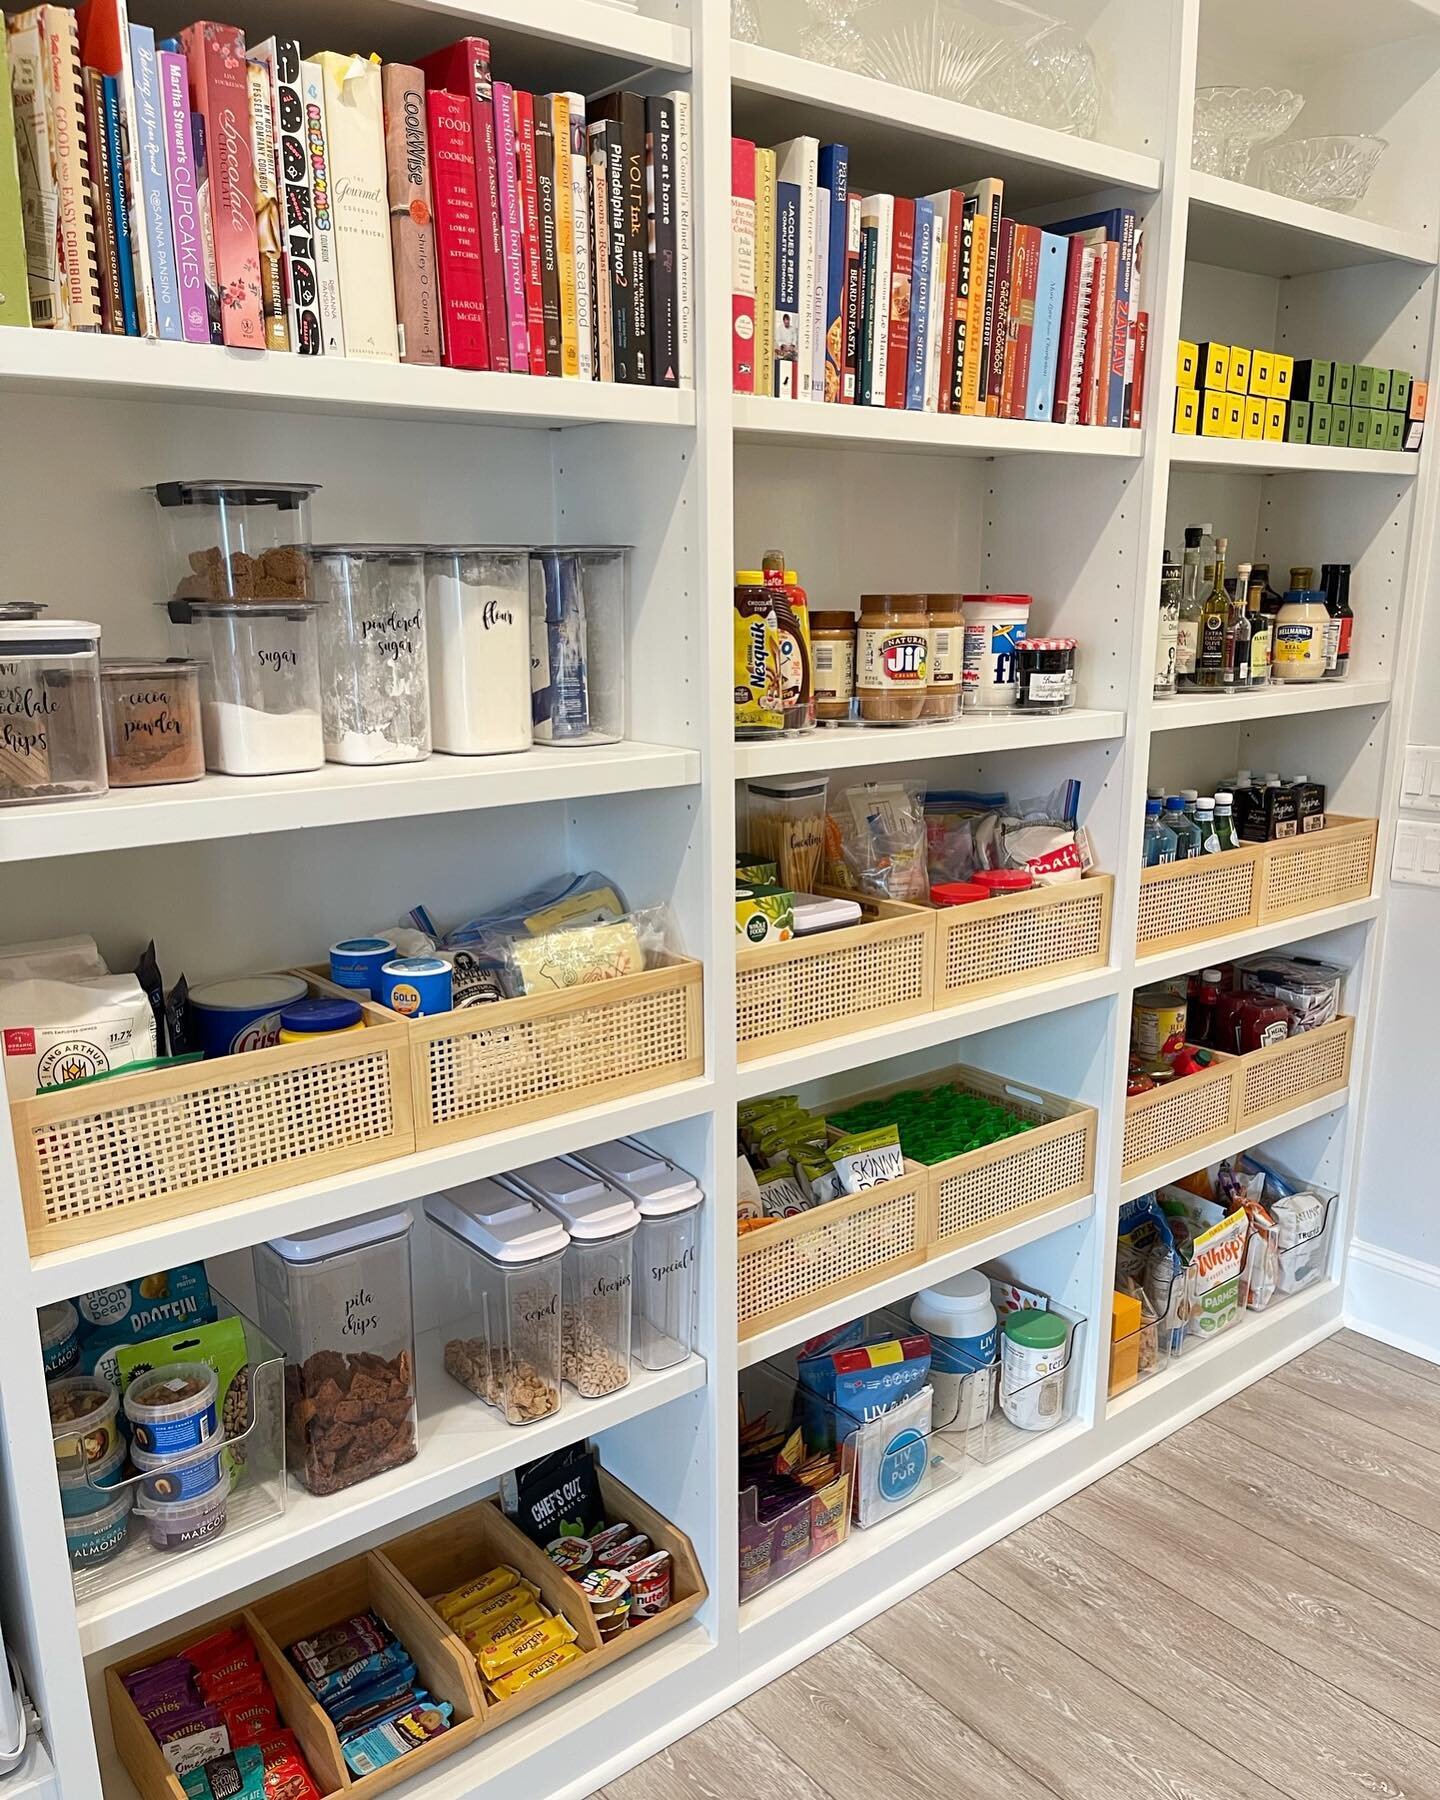 ✨ 𝑩𝒆𝒇𝒐𝒓𝒆 &amp; 𝑨𝒇𝒕𝒆𝒓 ✨

Playing with new textures and materials in this pantry 🤍

Swipe to the end to see where we started! 👉🏼

#charlestonorganizer #organizecharleston #organization #organizing #charleston #roomforpeaceorganizing #orga